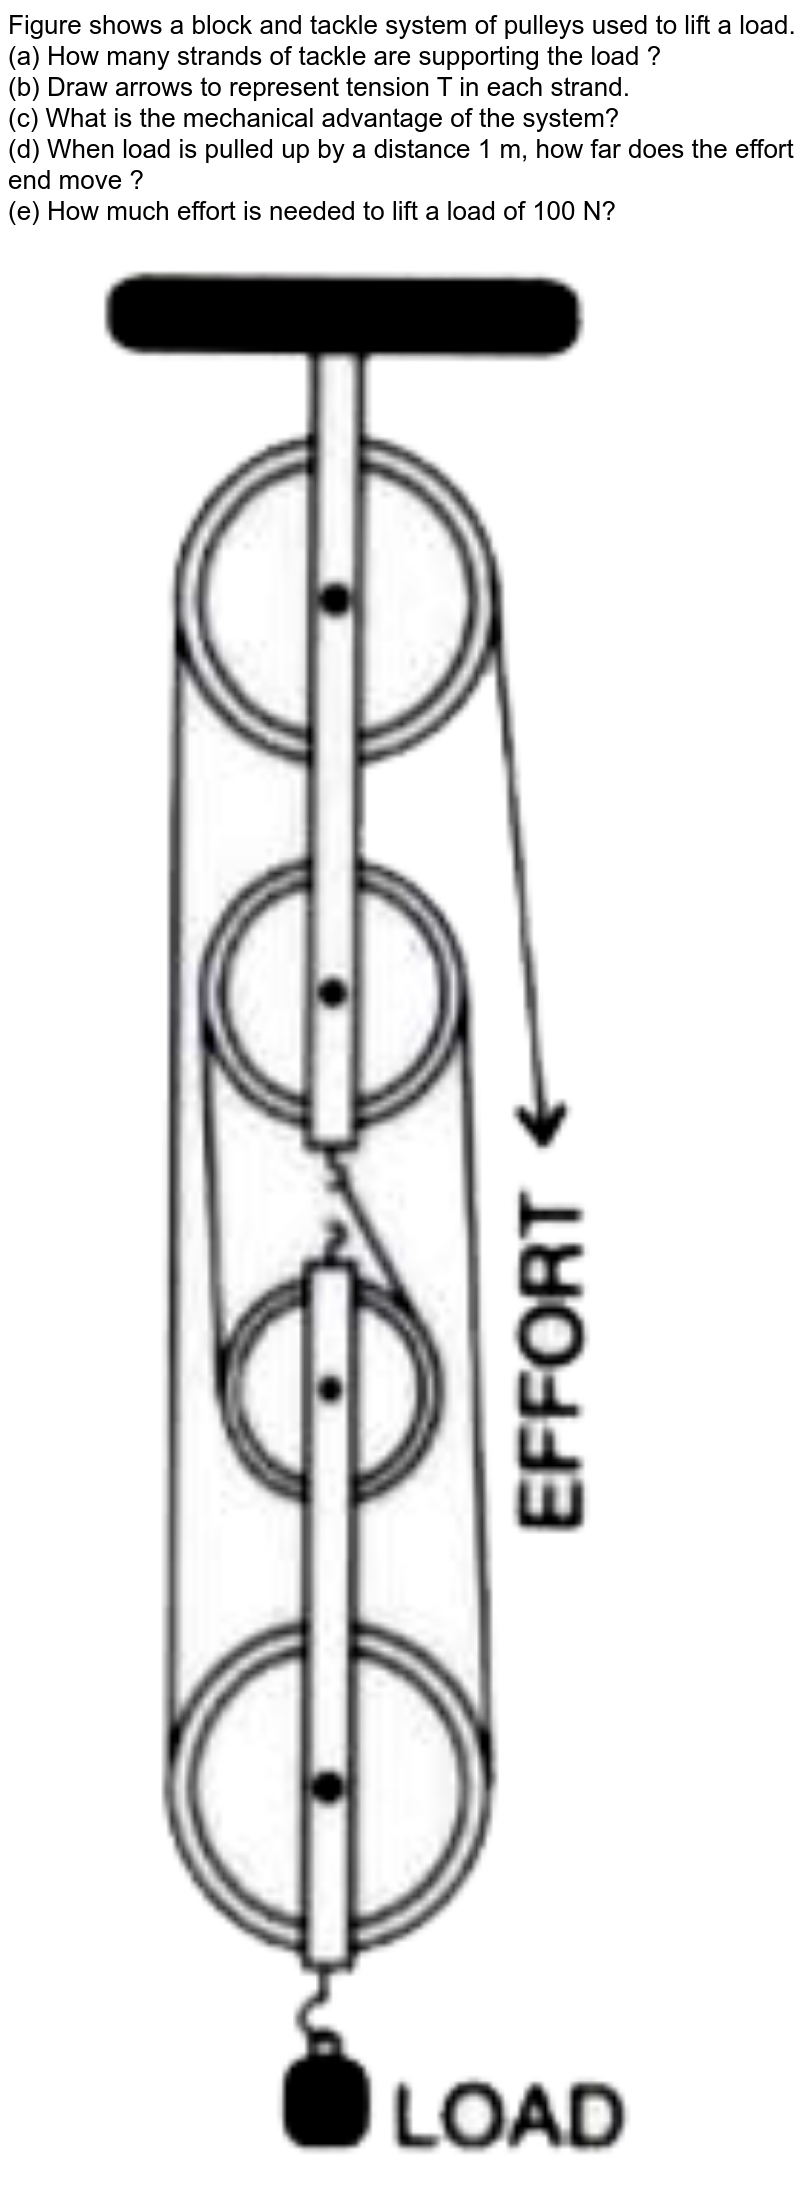 Figure shows a block and tackle system of pulleys used to lift a load. <br> (a) How many strands of tackle are supporting the load ? <br> (b) Draw arrows to represent tension T in each strand. <br> (c) What is the mechanical advantage of the system? <br> (d) When load is pulled up by a distance 1 m, how far does the effort end move ? <br> (e) How much effort is needed to lift a load of 100 N? <br> <img src="https://doubtnut-static.s.llnwi.net/static/physics_images/SEL_RPG_ICSE_PHY_X_C03_E02_032_Q01.png" width="80%">